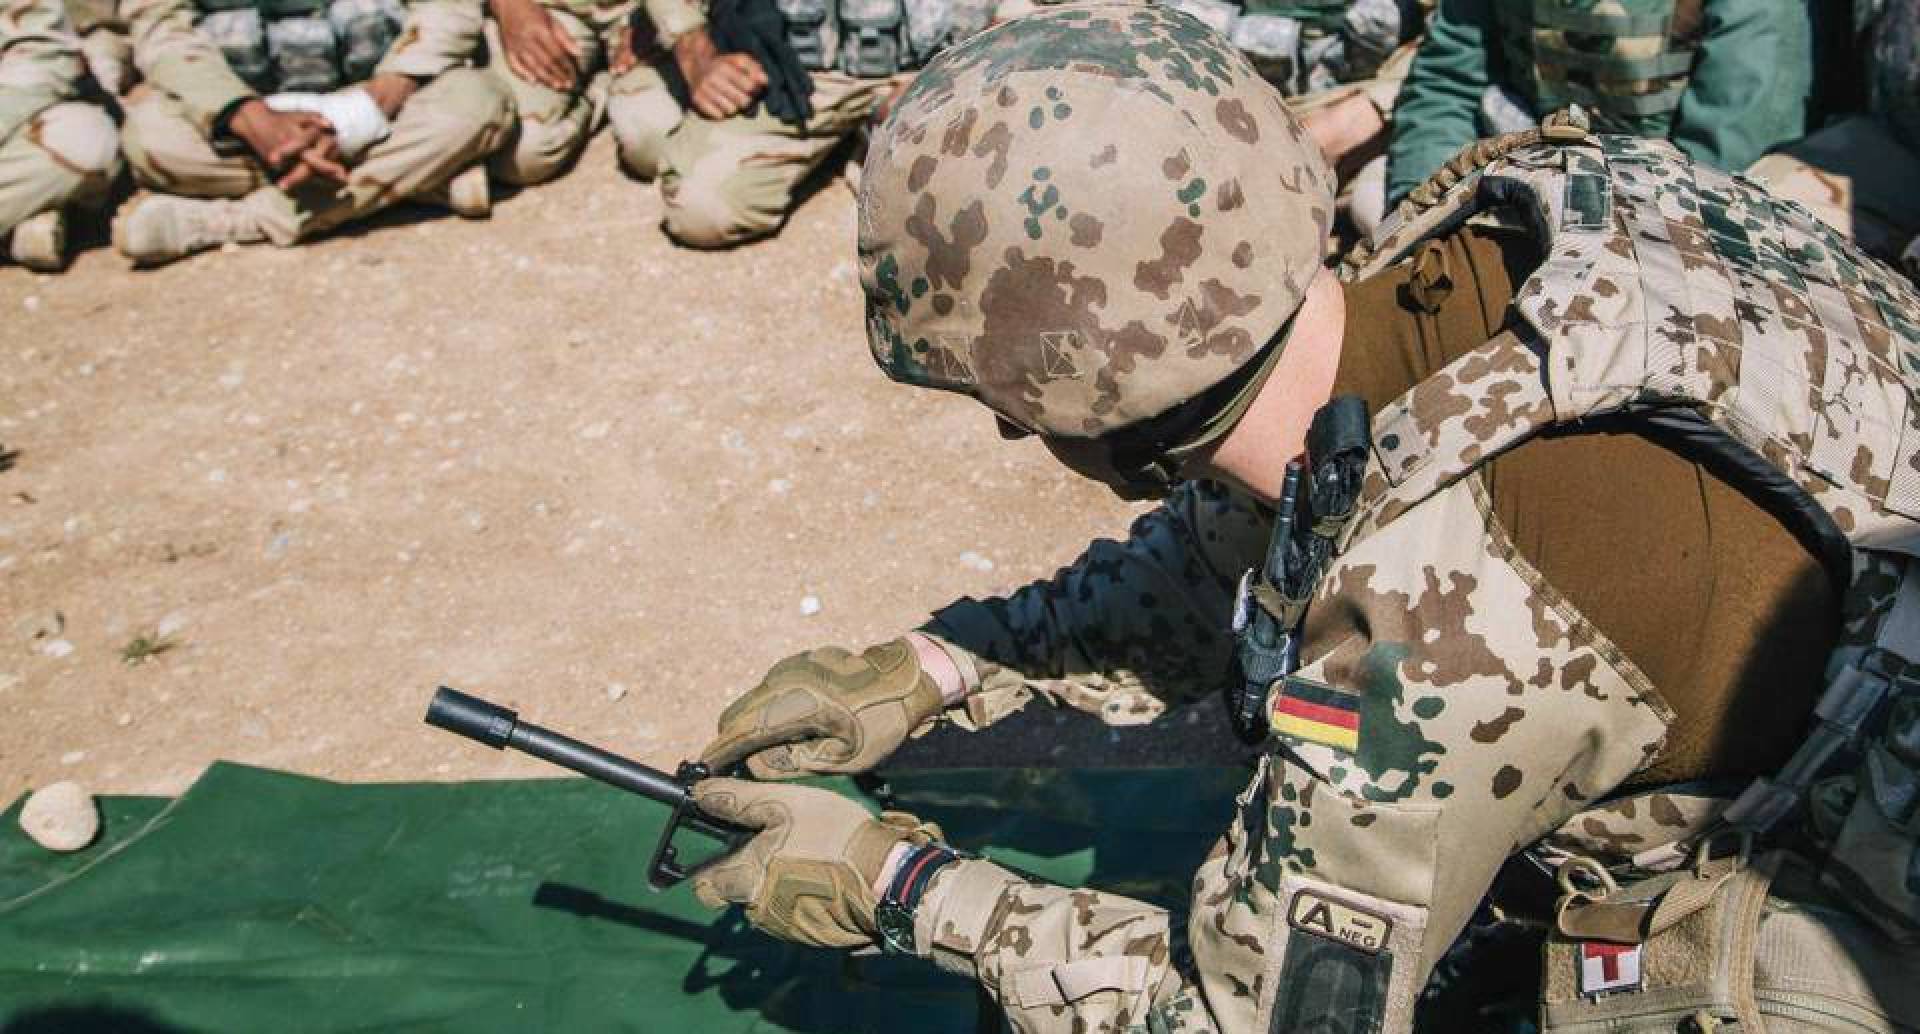 
German Army: The United States and its allies have suspended training for Iraqi forces